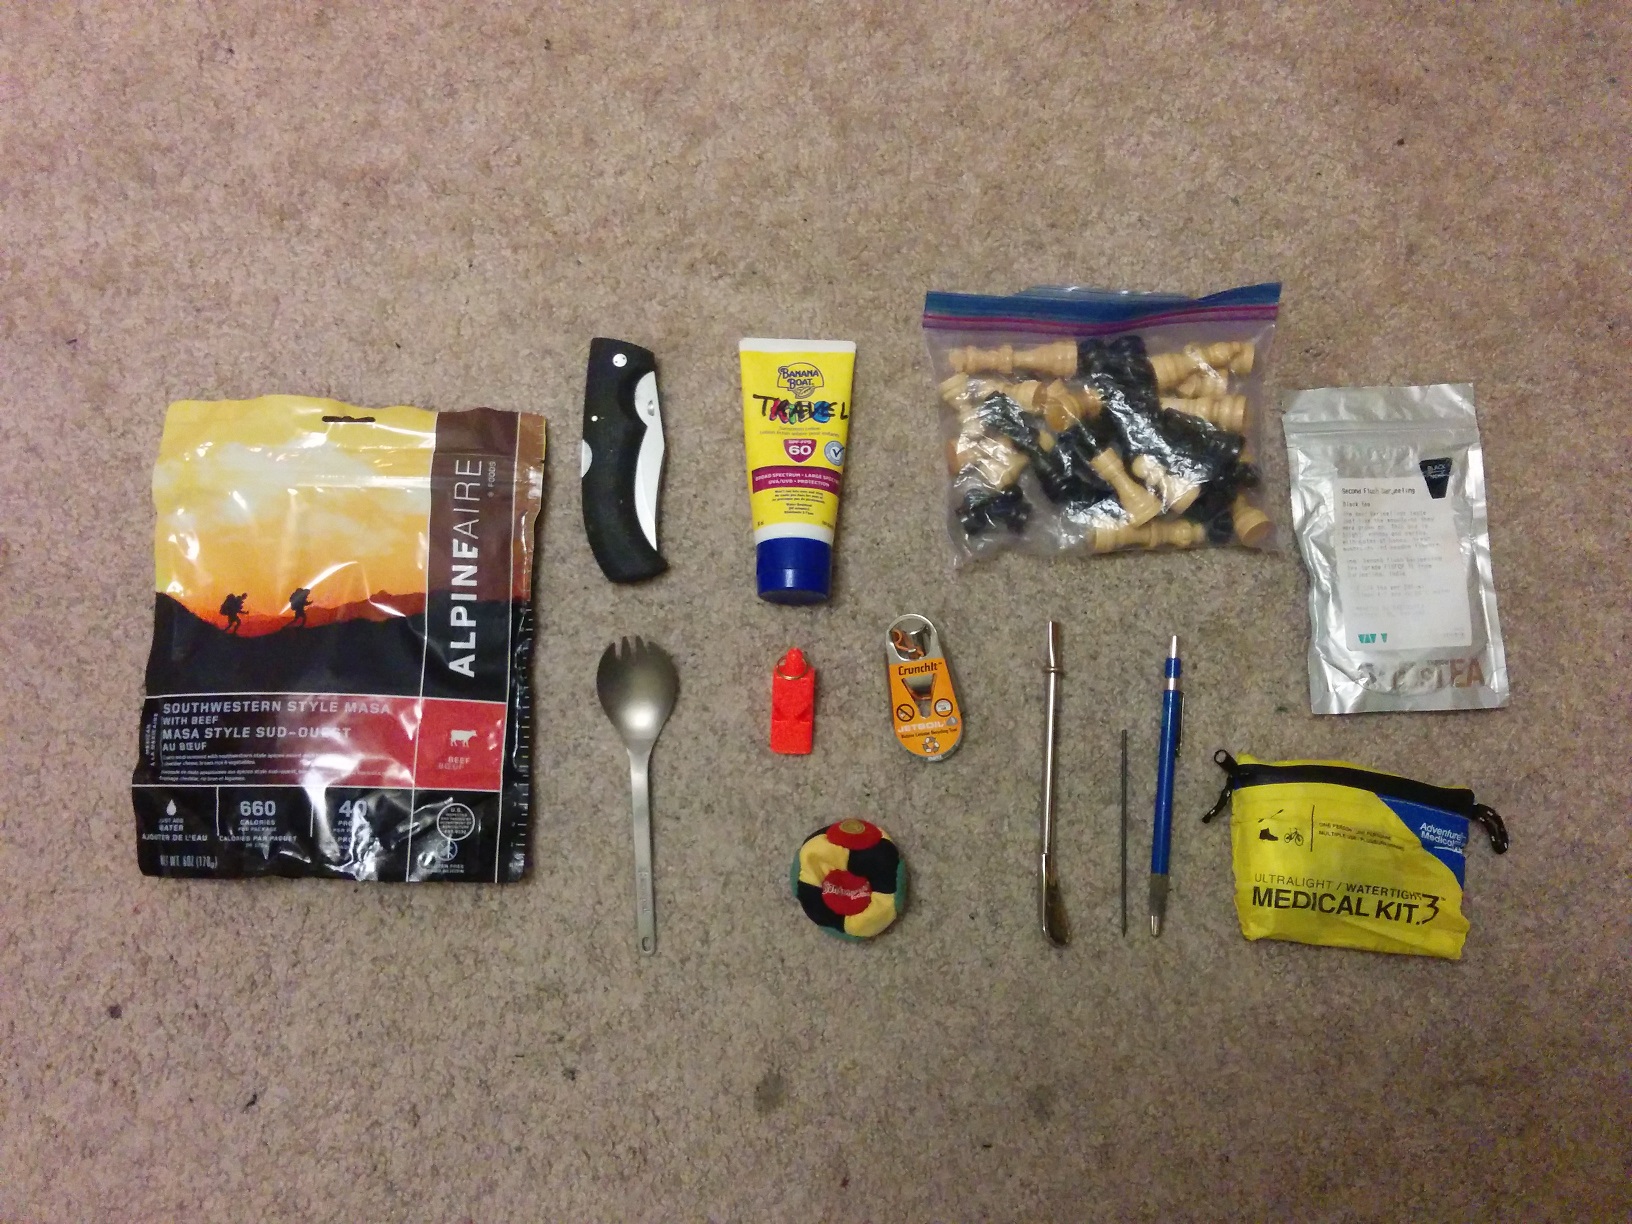 The contents front pocket, spread out neatly on the carpet.